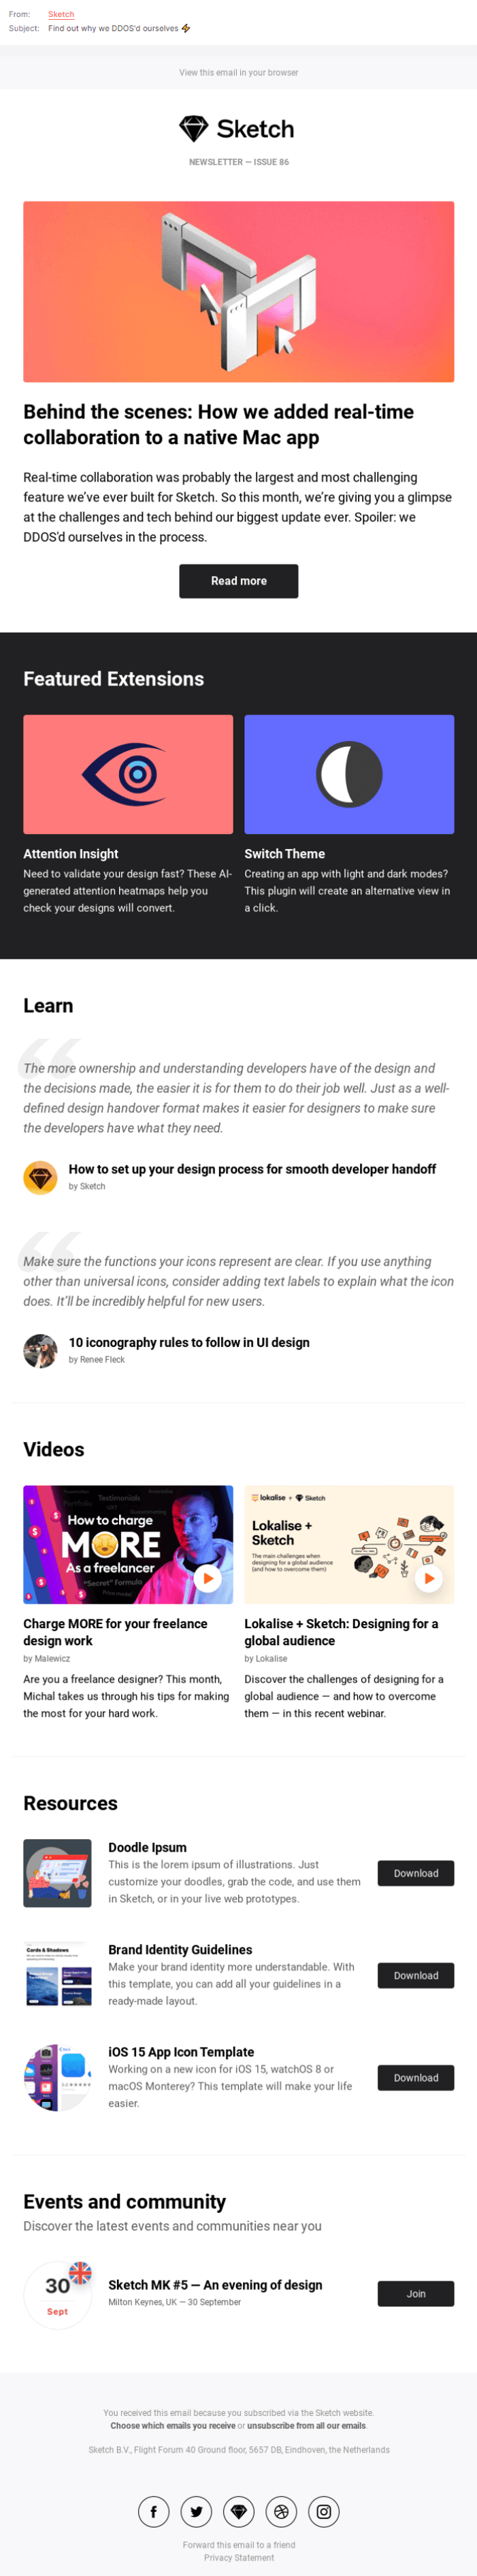 Sketch’s curated content email